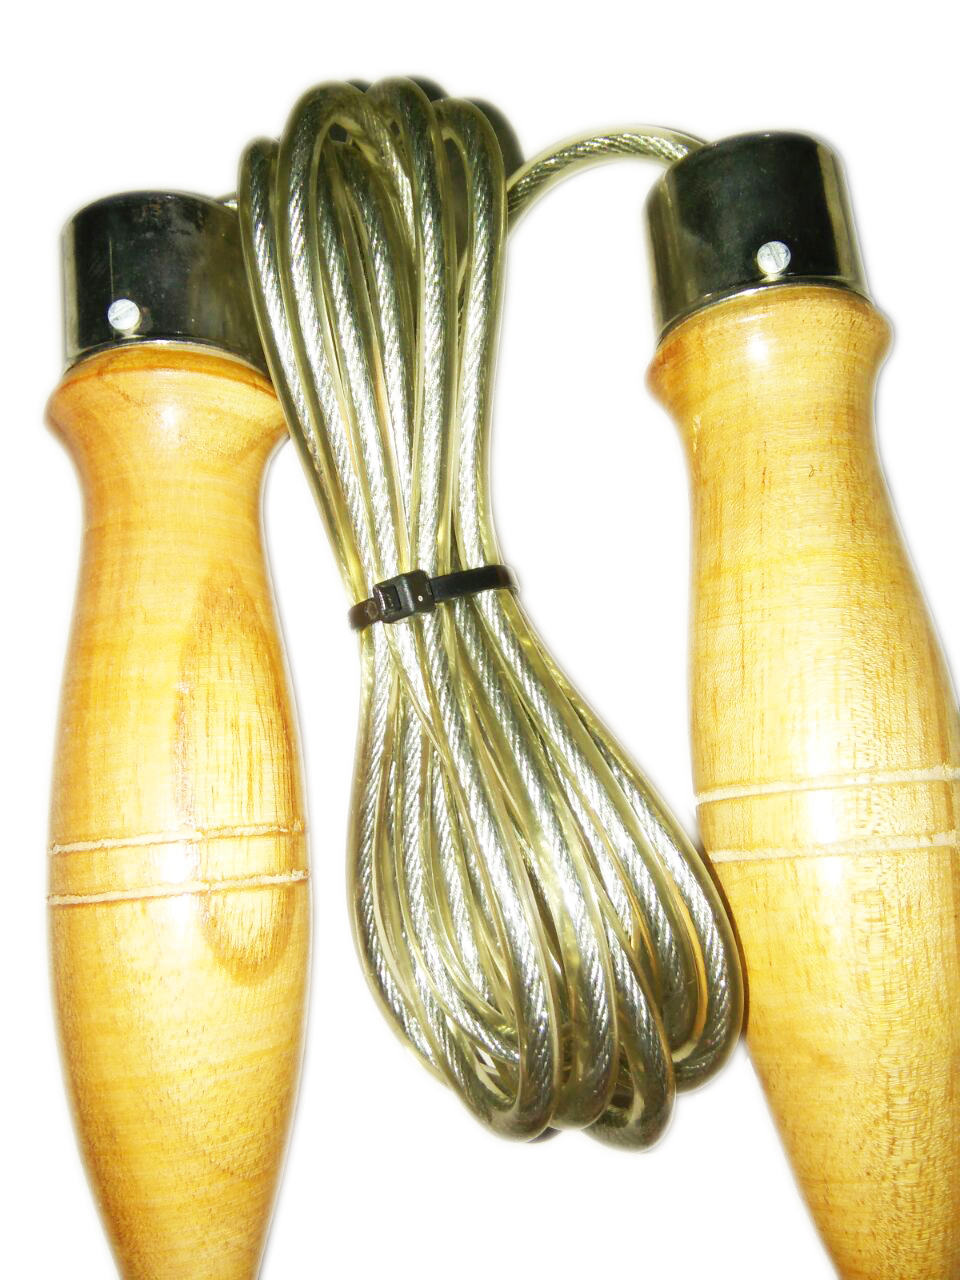 Steel wire Skipping Rope with Wooden Handle